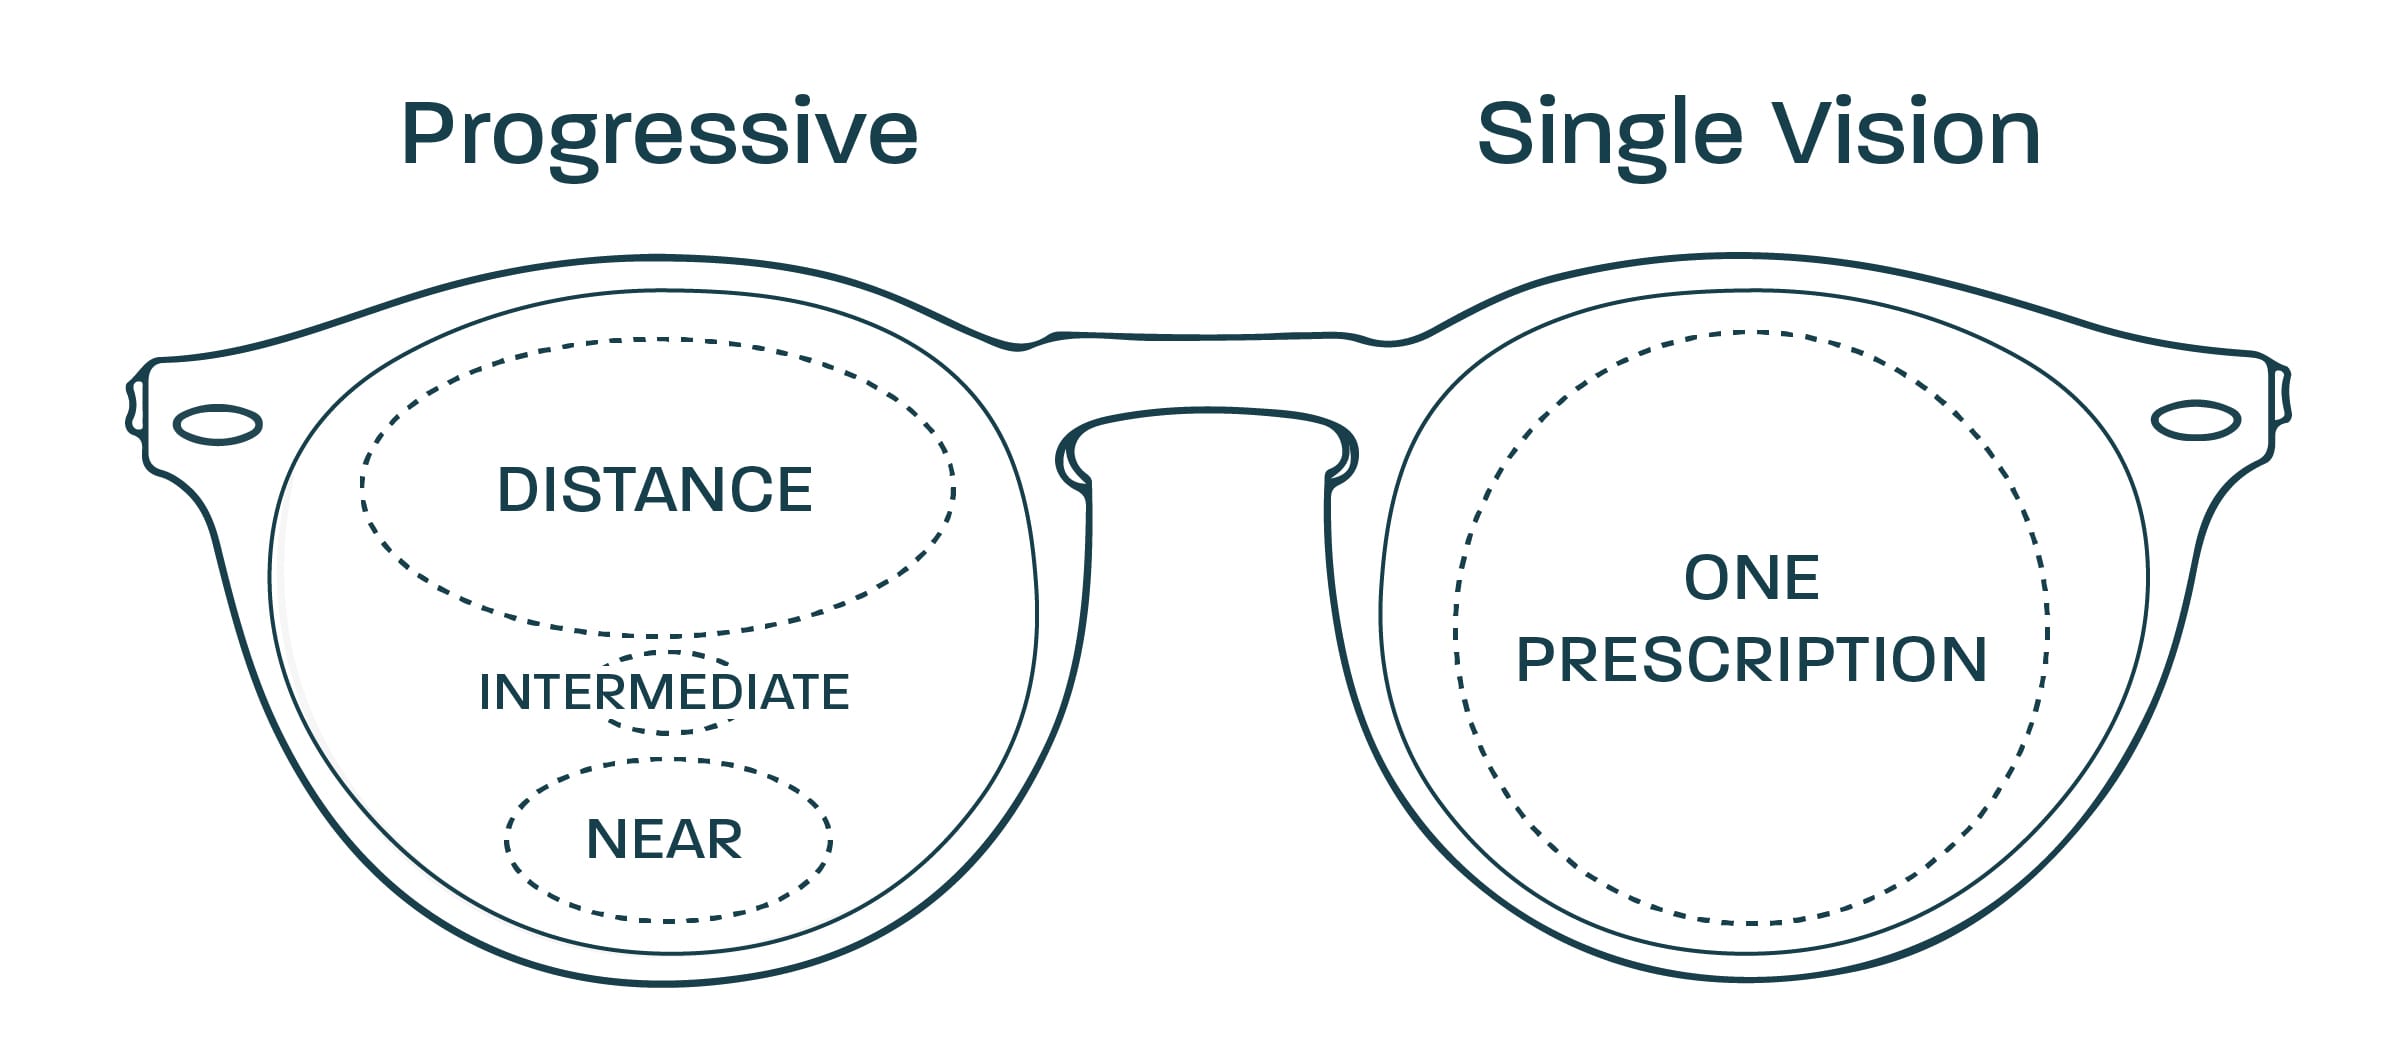 Illustration of a glasses frame that shows the different viewing areas covered by a single vision lens compared to a progressive lens. The single vision area covers the whole lens, while a progressive lens has a large distance viewing area at the top and a smaller area for viewing near objects at the bottom, connected by a narrow field for seeing at intermediate distances.